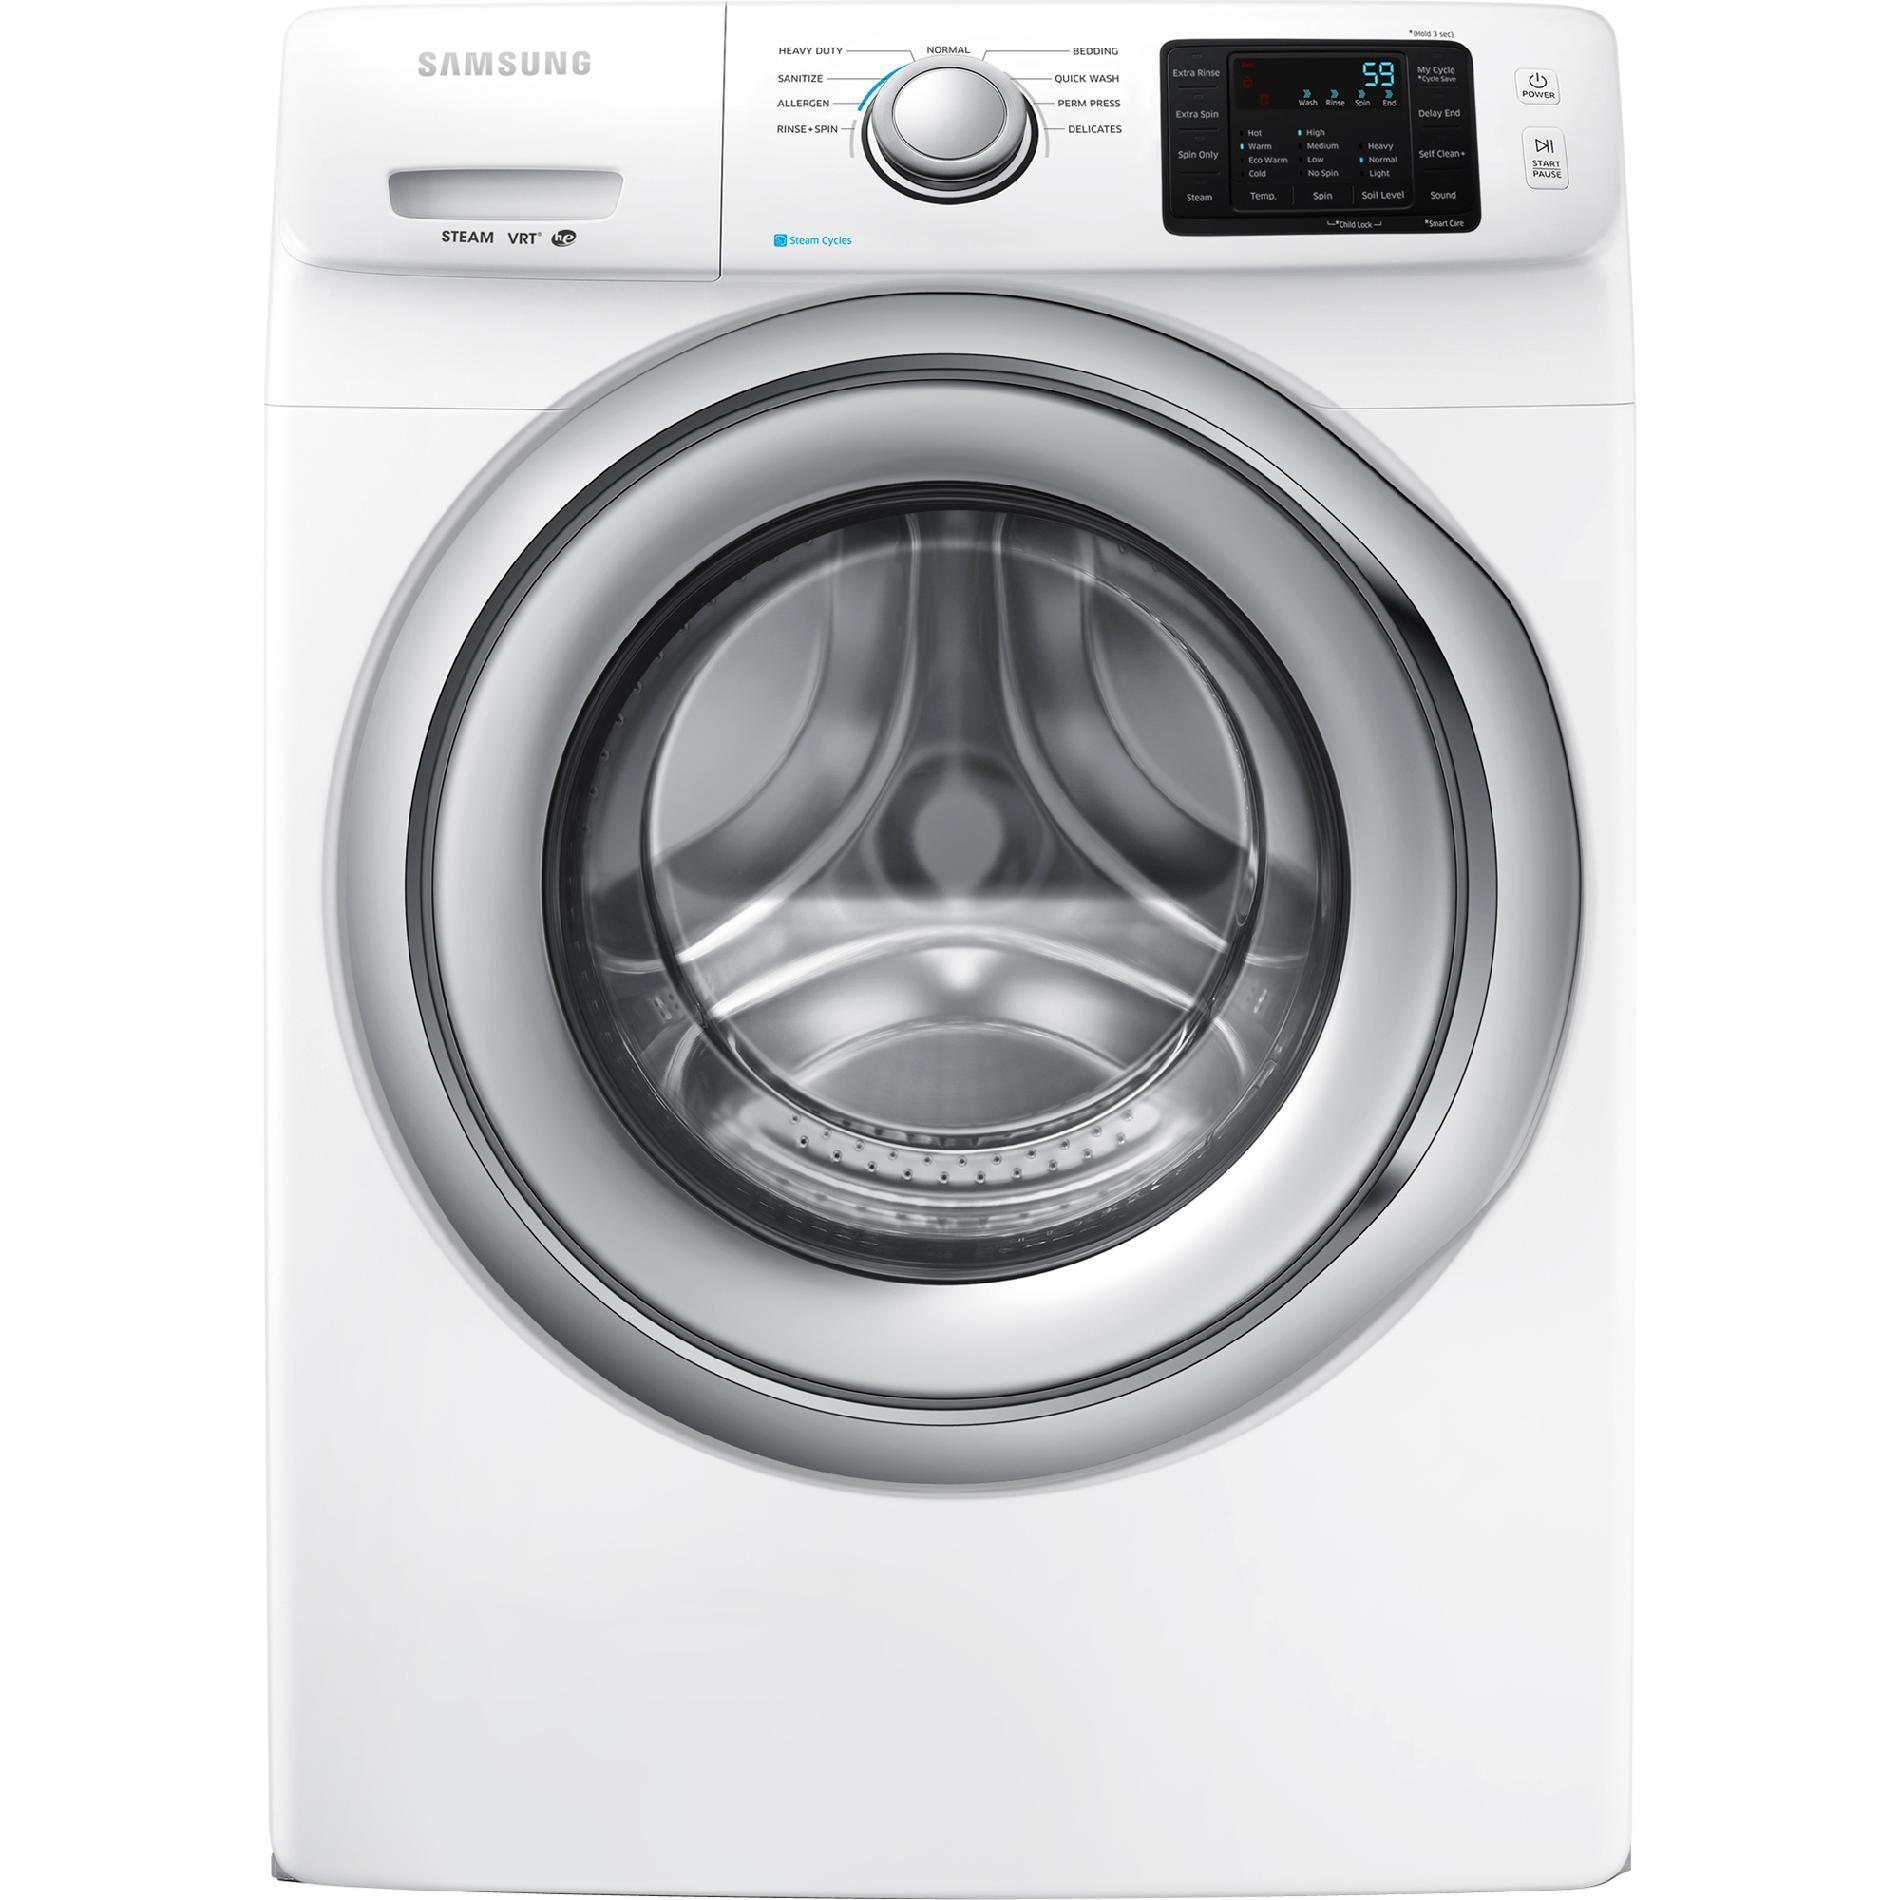 Which company builds the best dryer?